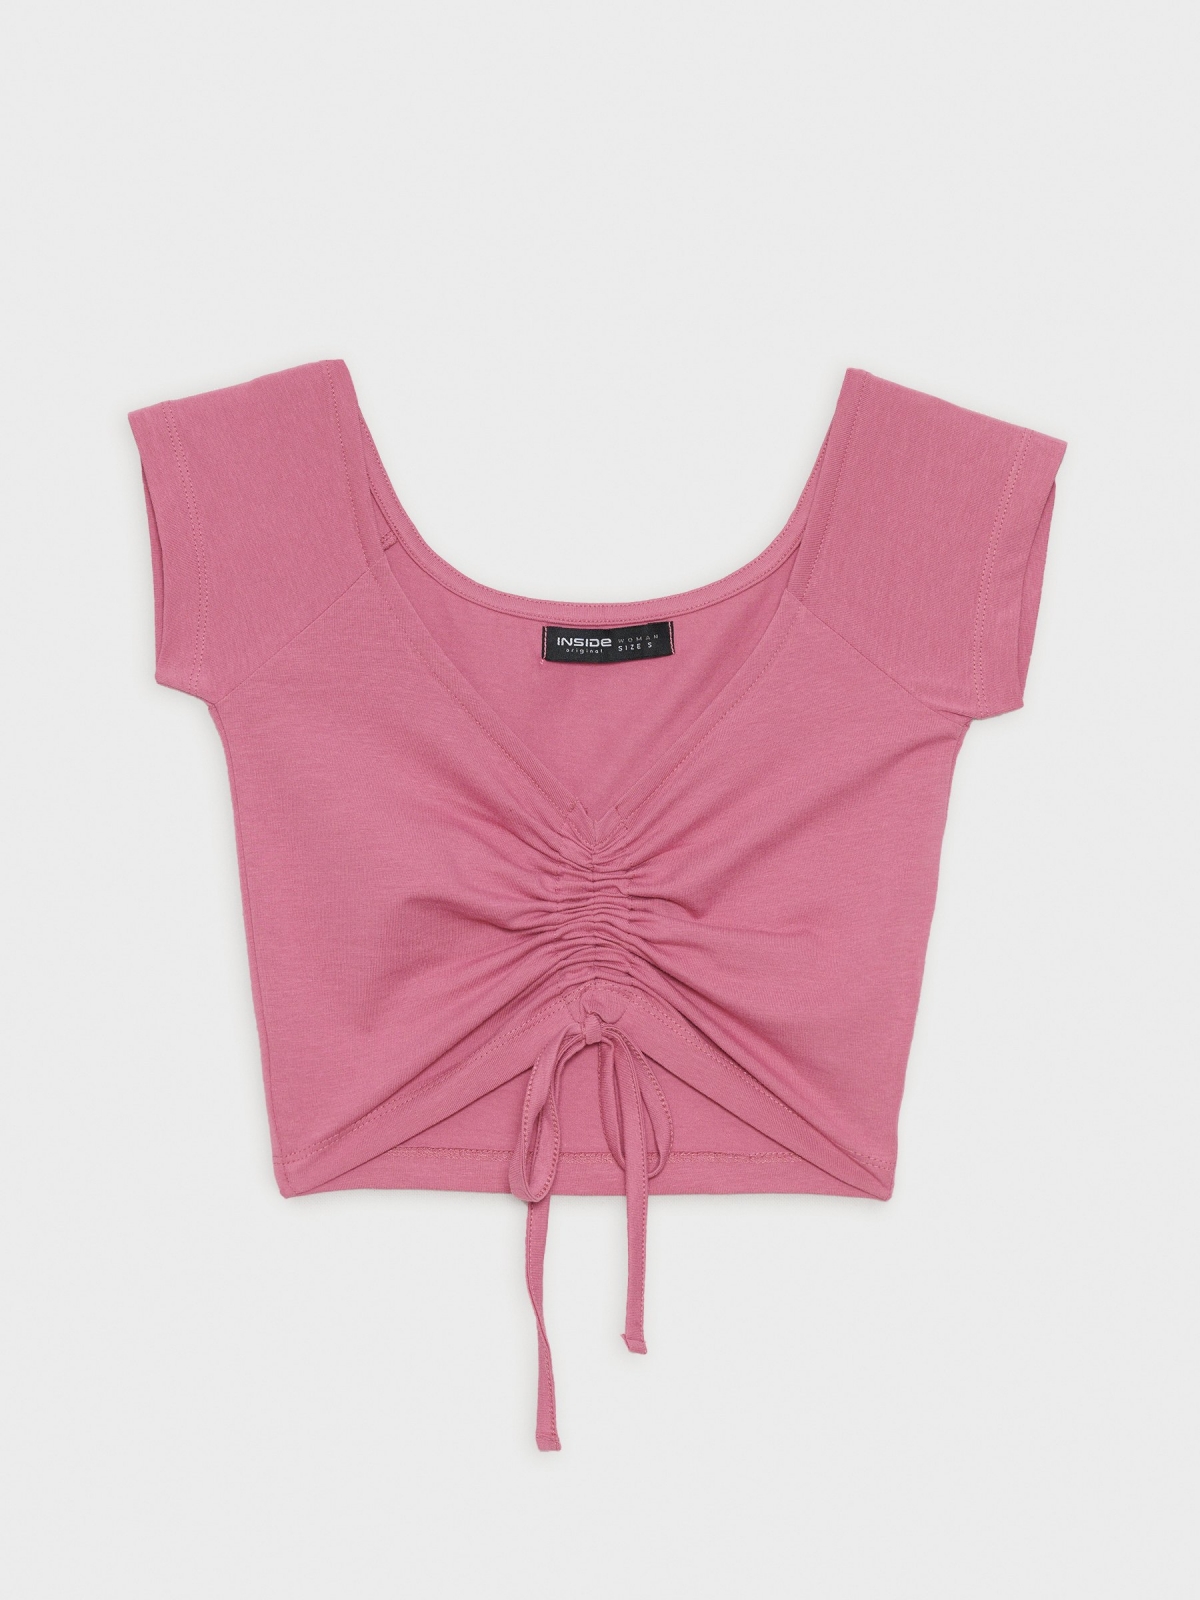  Ruched cropped t-shirt powdered pink